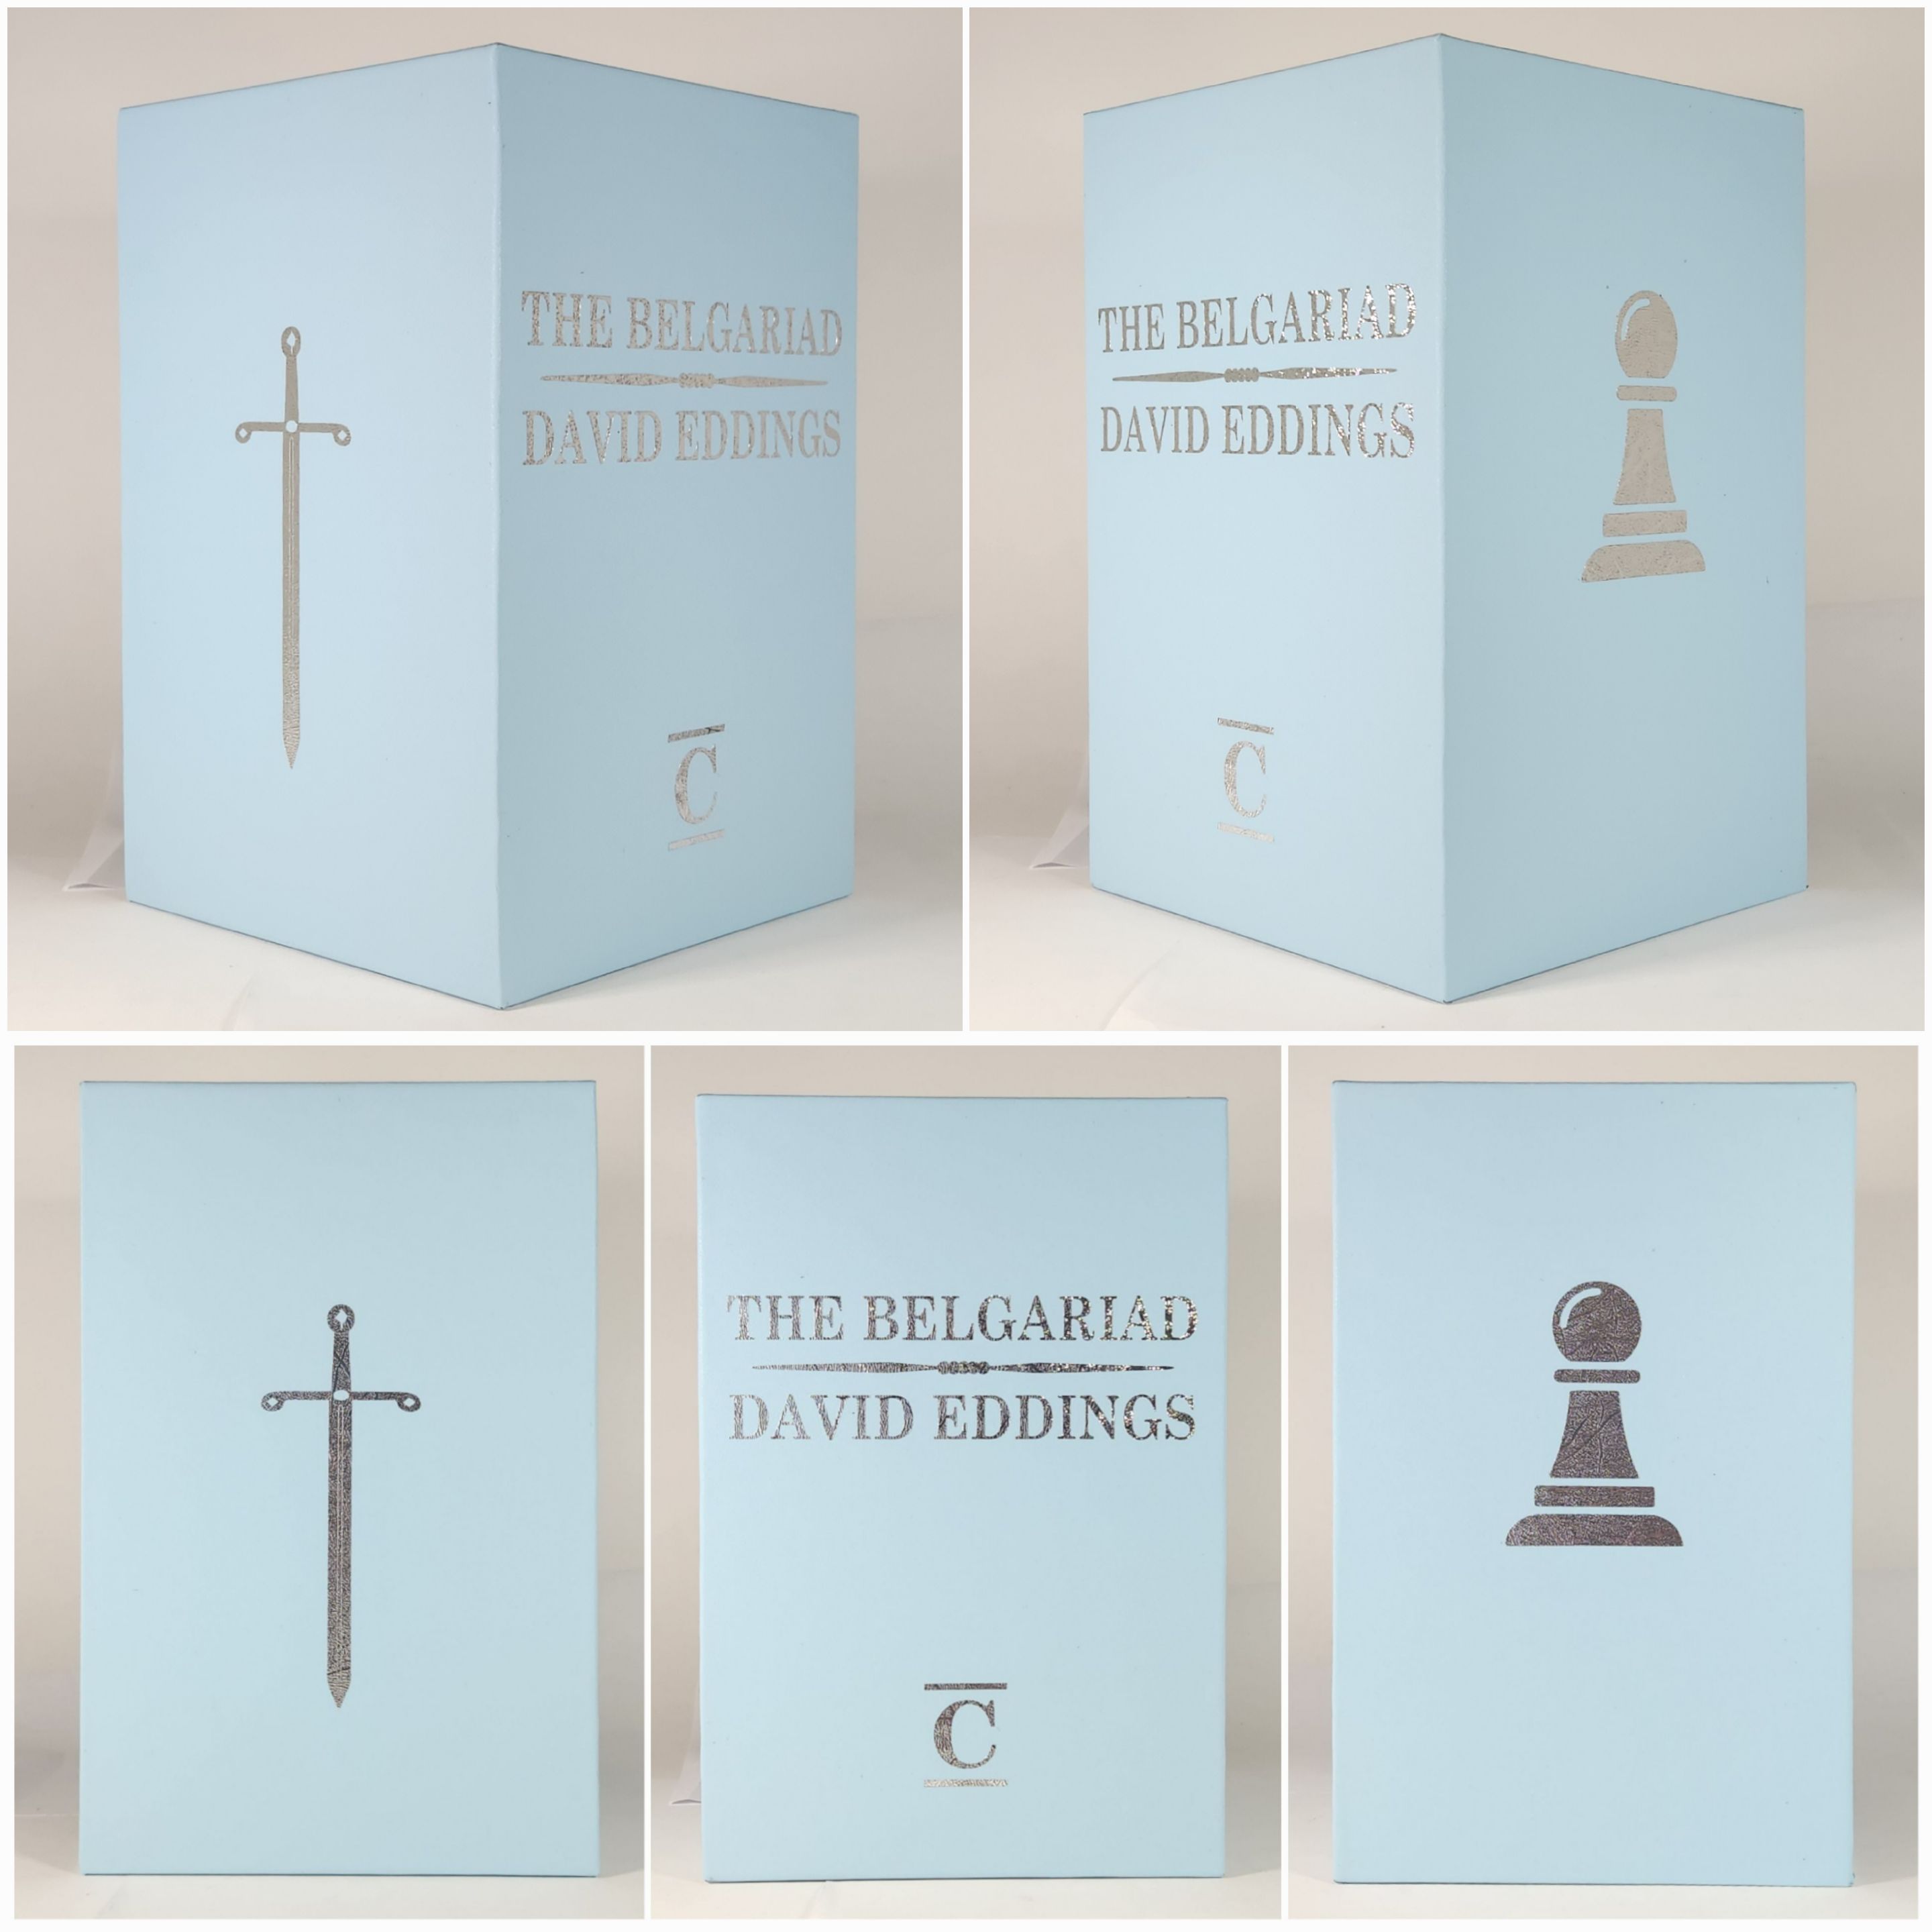 Slipcase designed for The Belgariad Quintet by David Eddings with Silver Textured Icons.